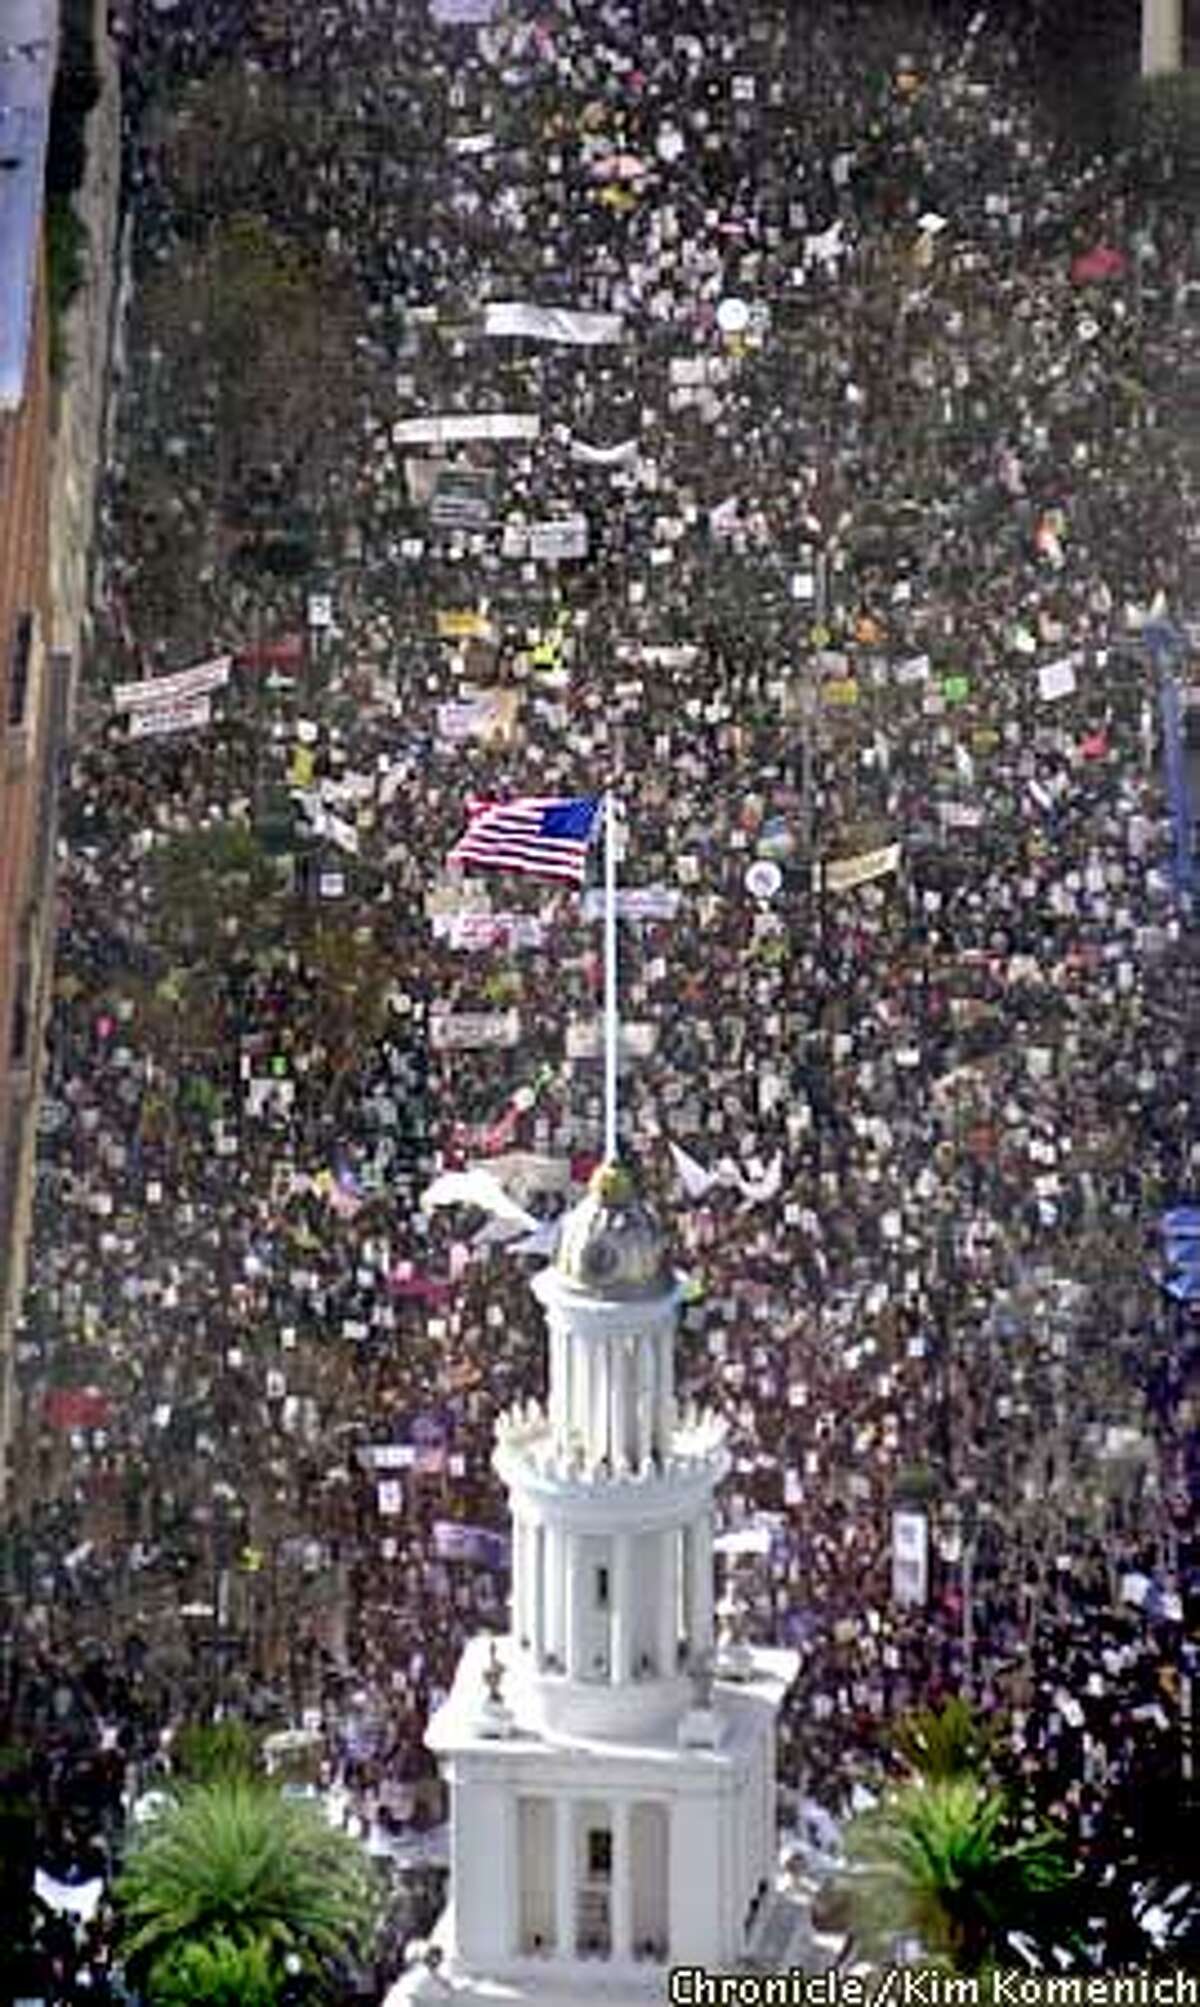 Aerial photos of tens of thousands of anti-war demonstrators as they march from Justin Herman Plaza to the S.F. Civic Center to protest the U.S. policy on Iraq (and a few other things). CHRONICLE PHOTO BY KIM KOMENICH